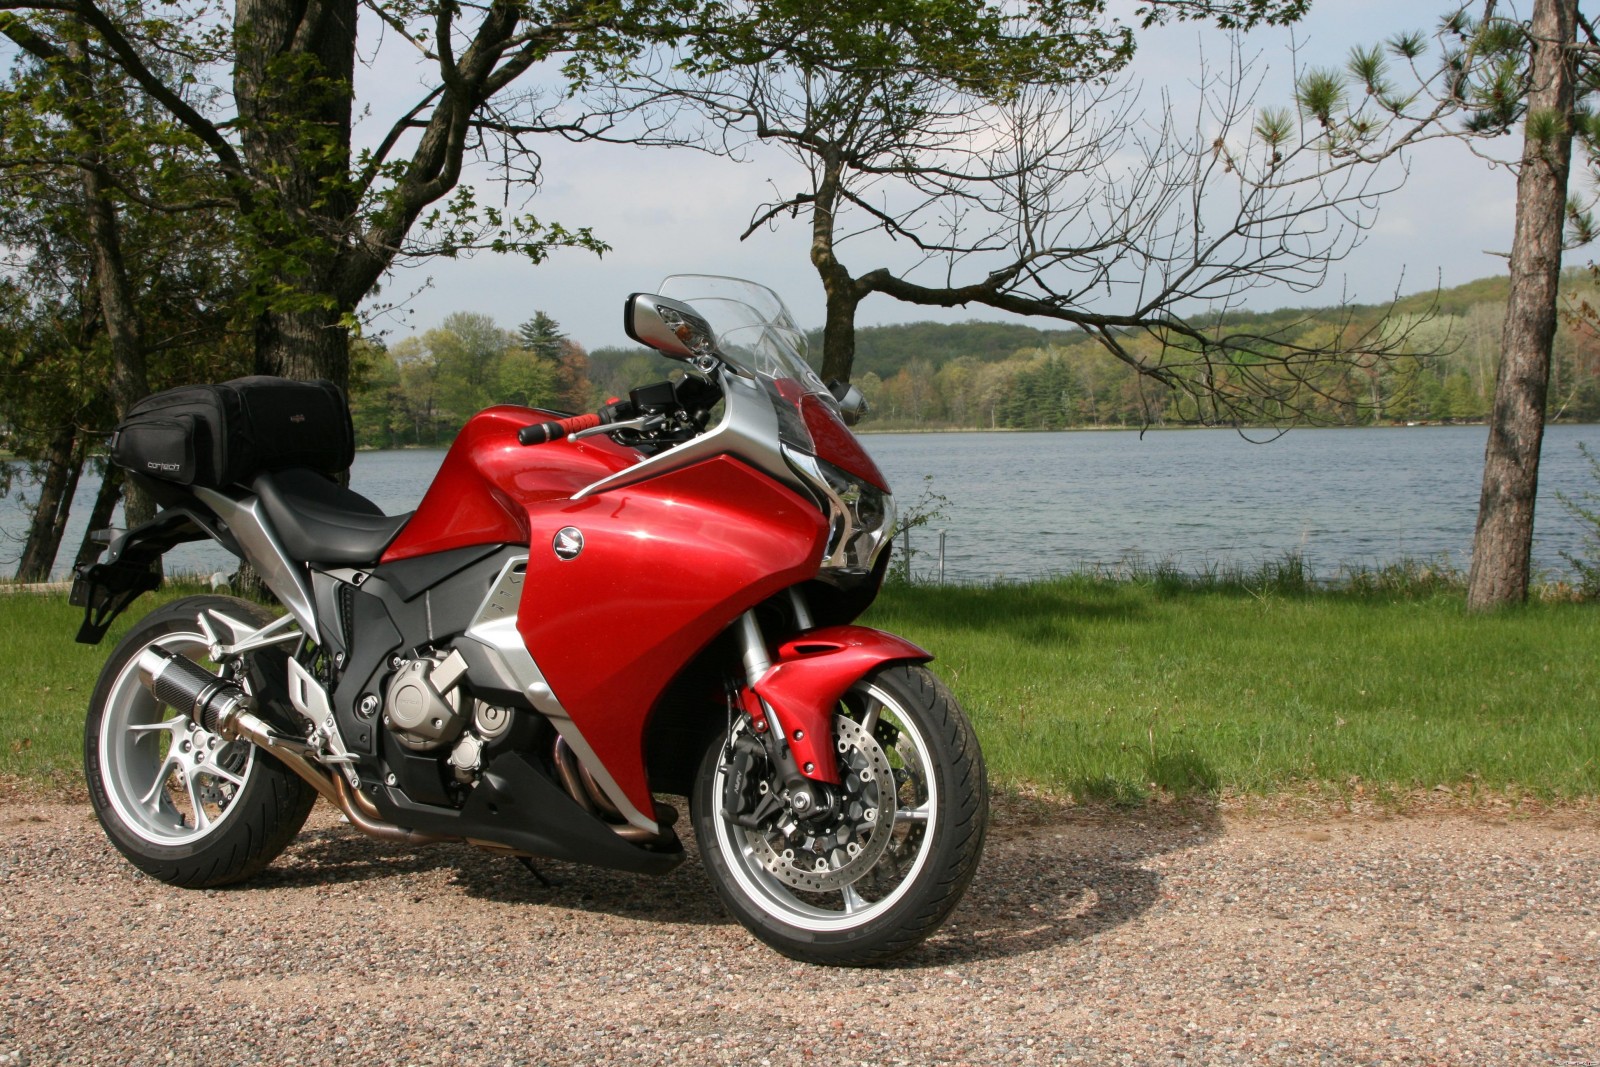 First ride with new slipon VFR1200 (132 mile ride)